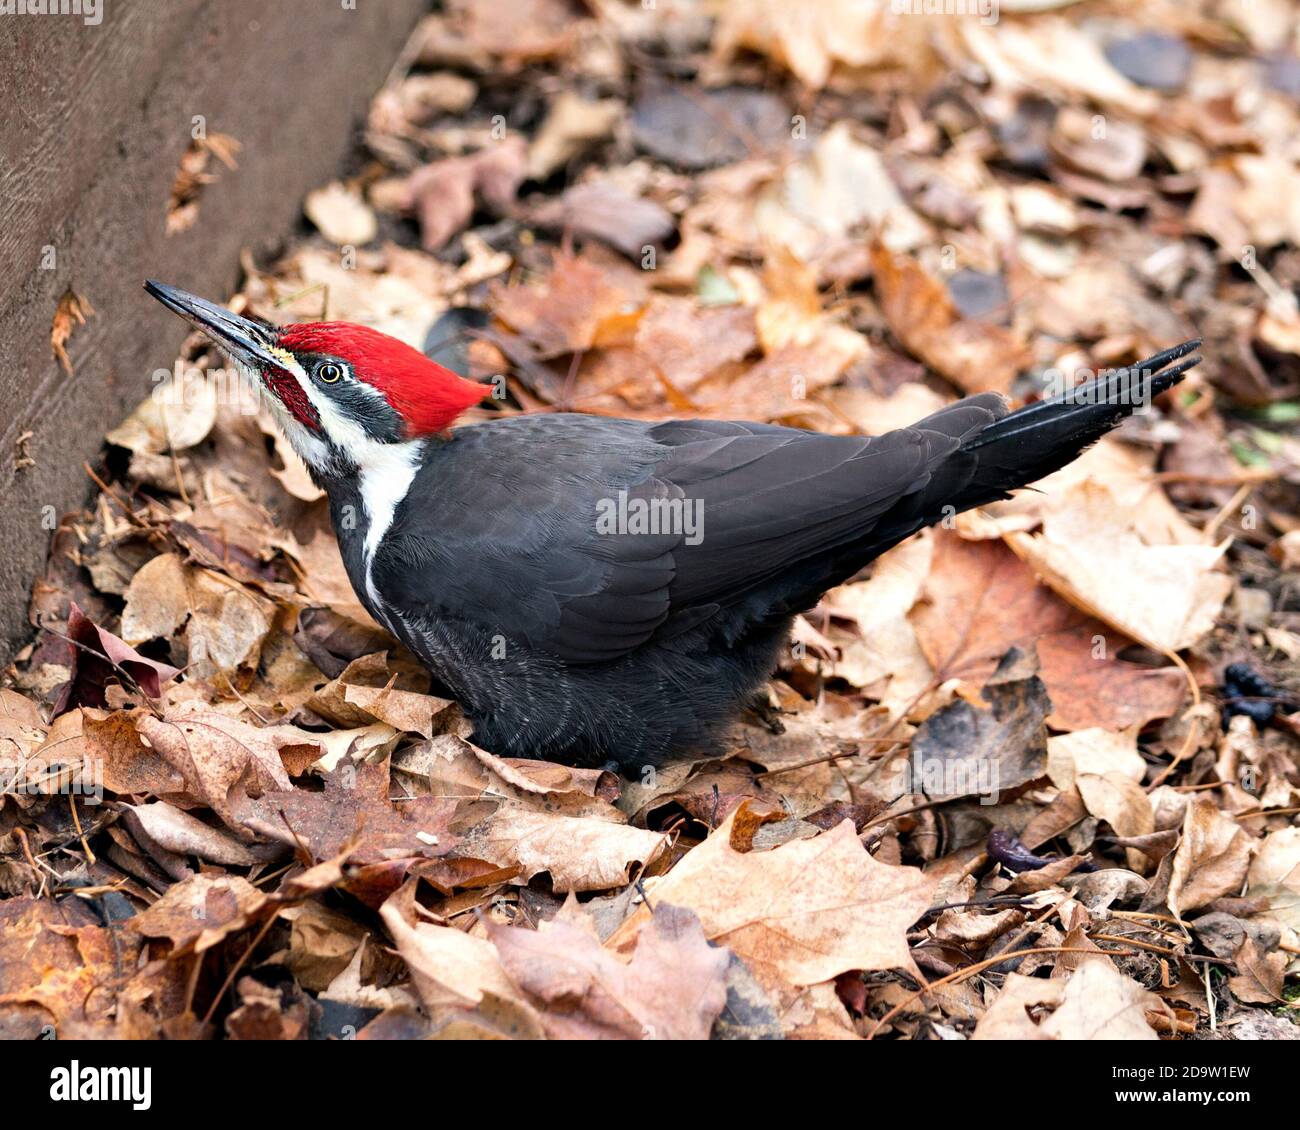 Woodpecker bird close-up profile view with a brown leaves background in its environment and habitat making hole on a wood side. Stock Photo